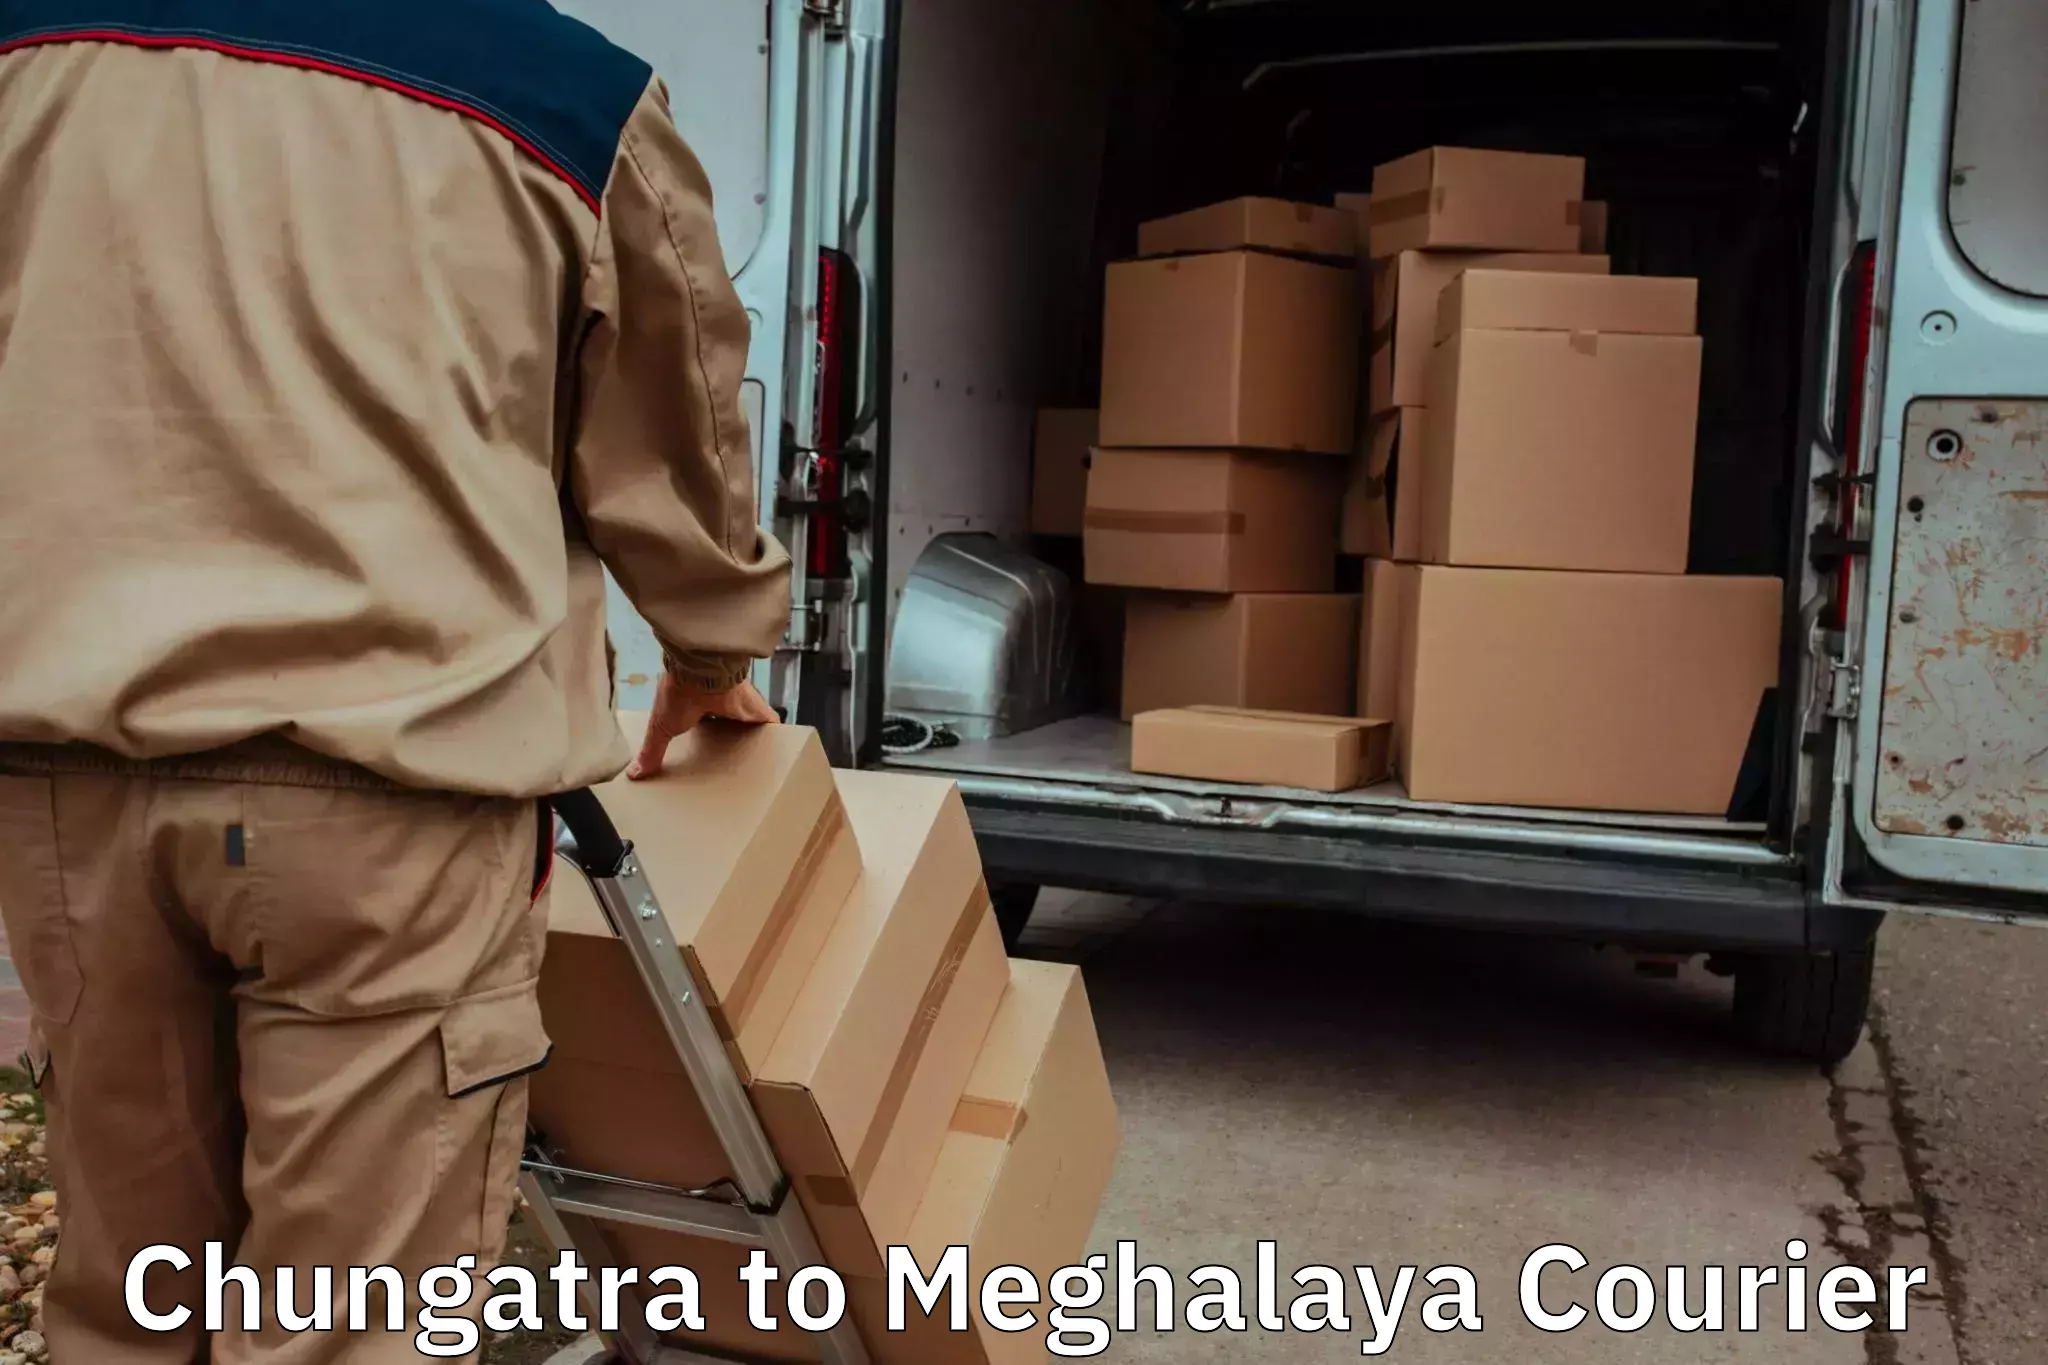 Furniture delivery service Chungatra to Shillong